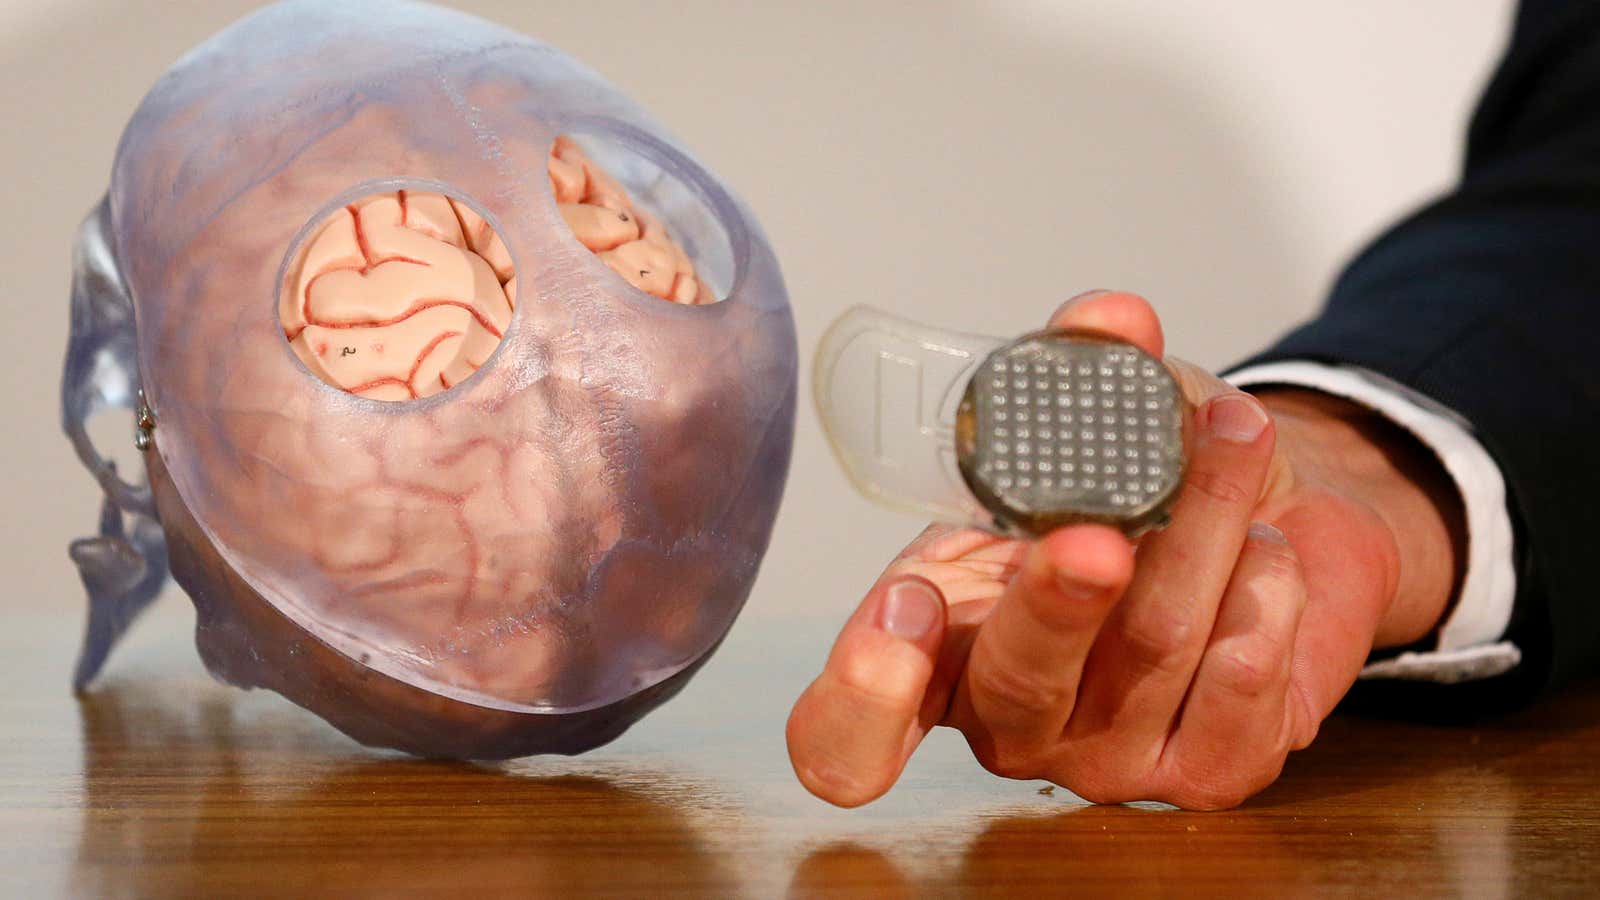 Neural implants are used for deep brain stimulation, vagus nerve stimulation, and mind-controlled prostheses.